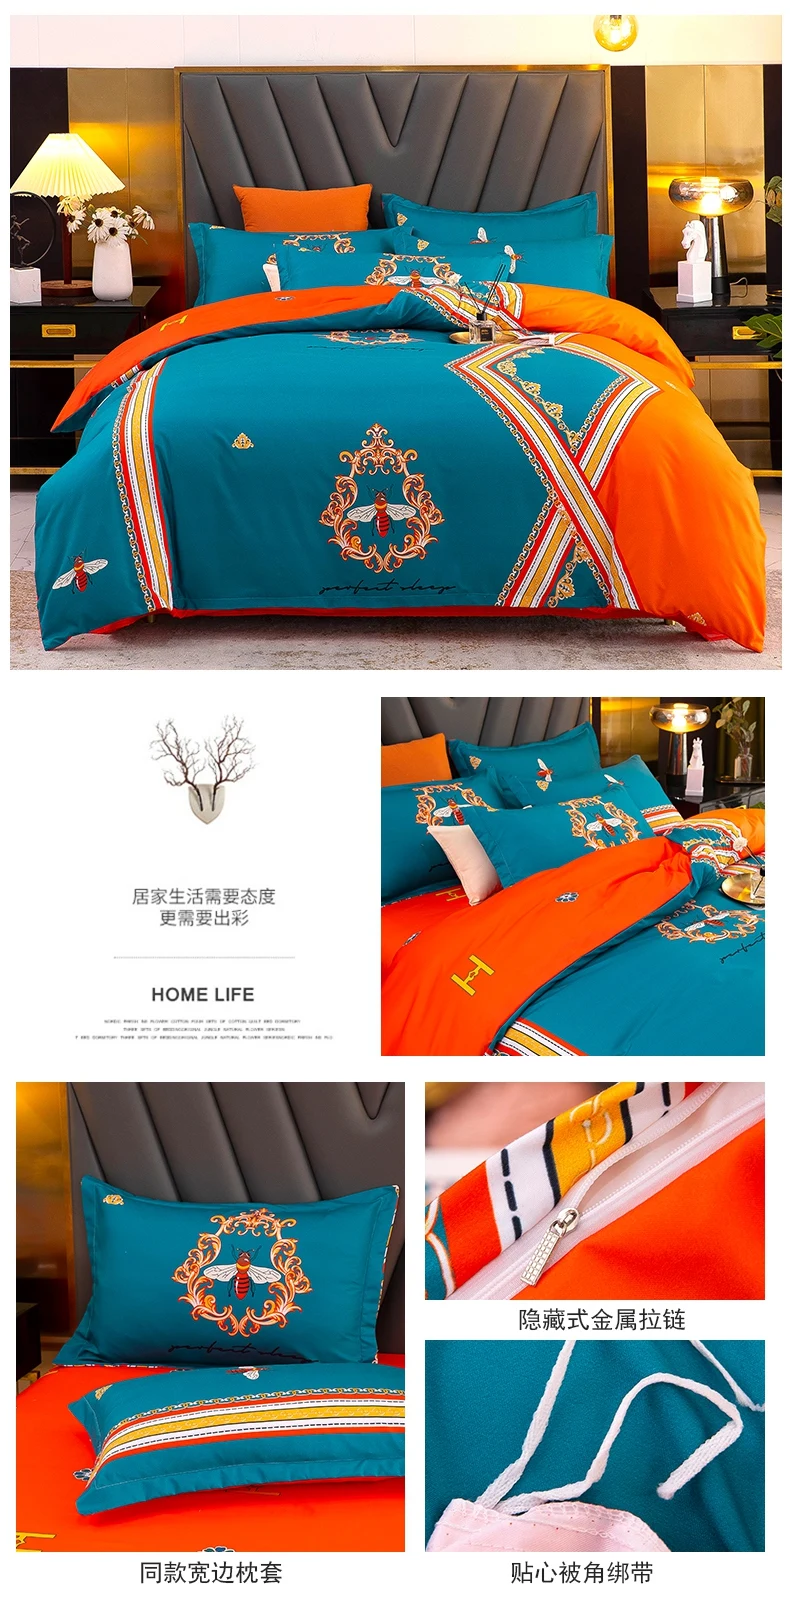 Luxury 3 or 4pcs Bed Linen Set High Quality Soft Bedding Set Flower Duvet Cover Set with Zipper Closure Twin Full Queen King